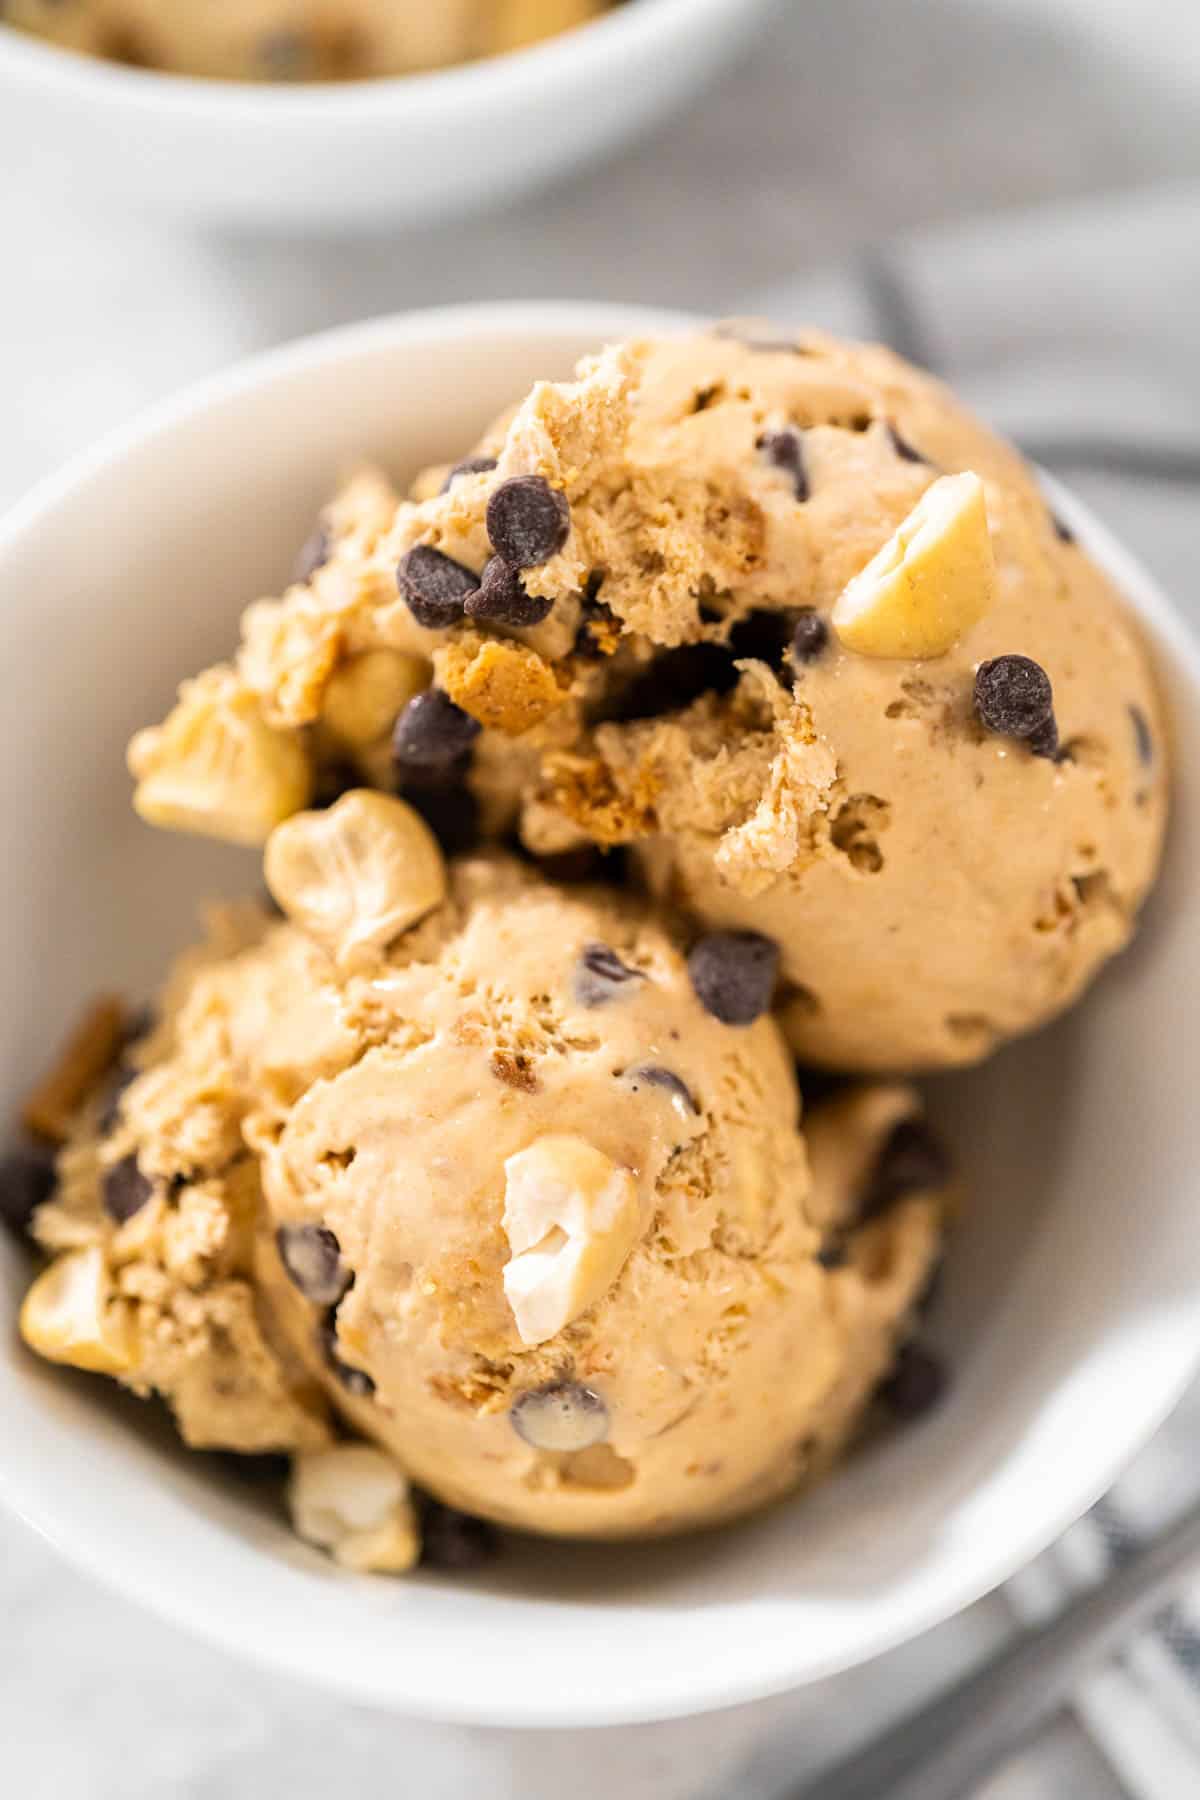 Two scoops of coffee ice cream in a white bowl.